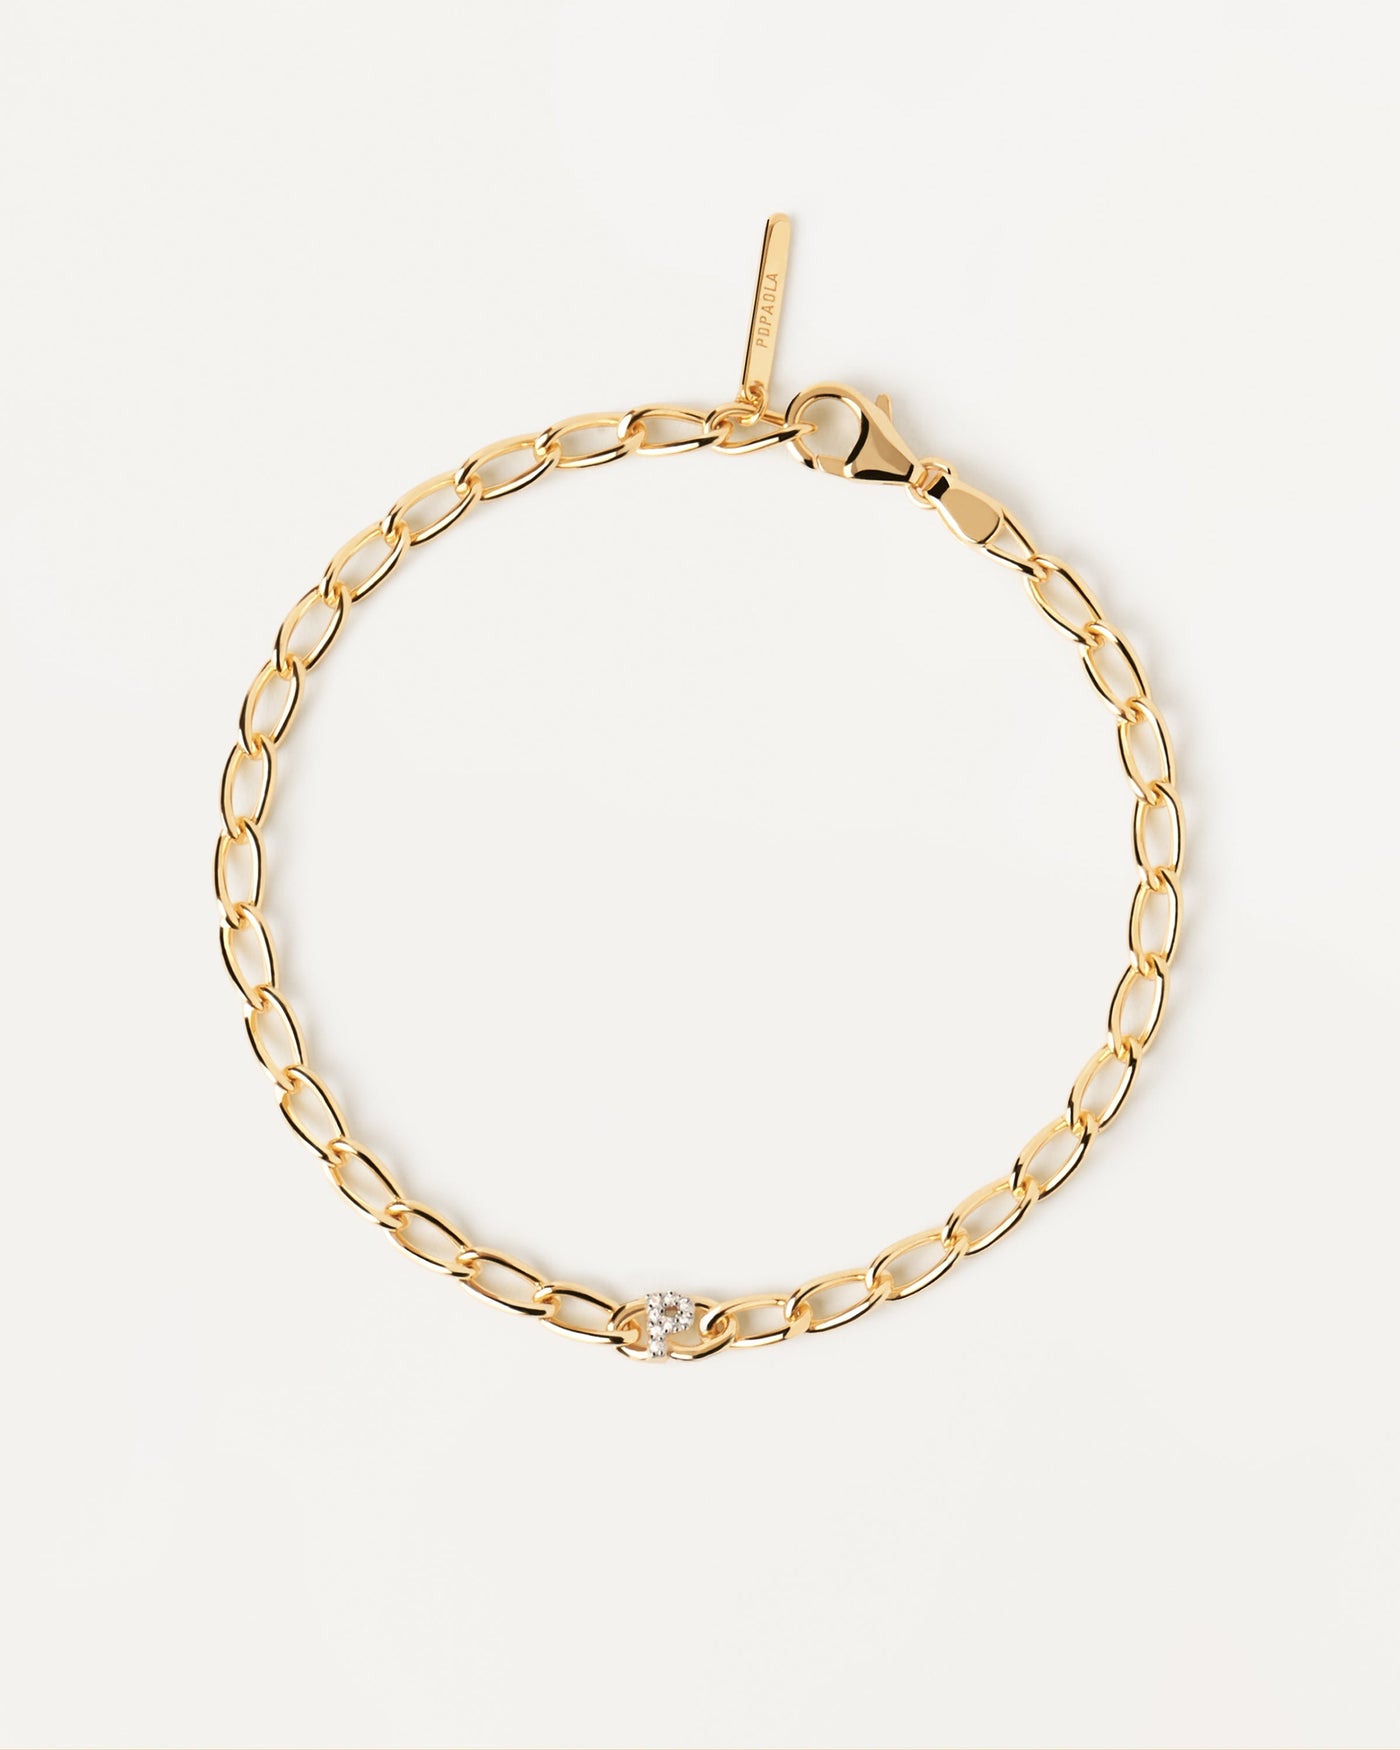 2023 Selection | Letter P Chain Bracelet. cable chain bracelet in gold-plated silver with initial P in zirconia. Get the latest arrival from PDPAOLA. Place your order safely and get this Best Seller. Free Shipping.